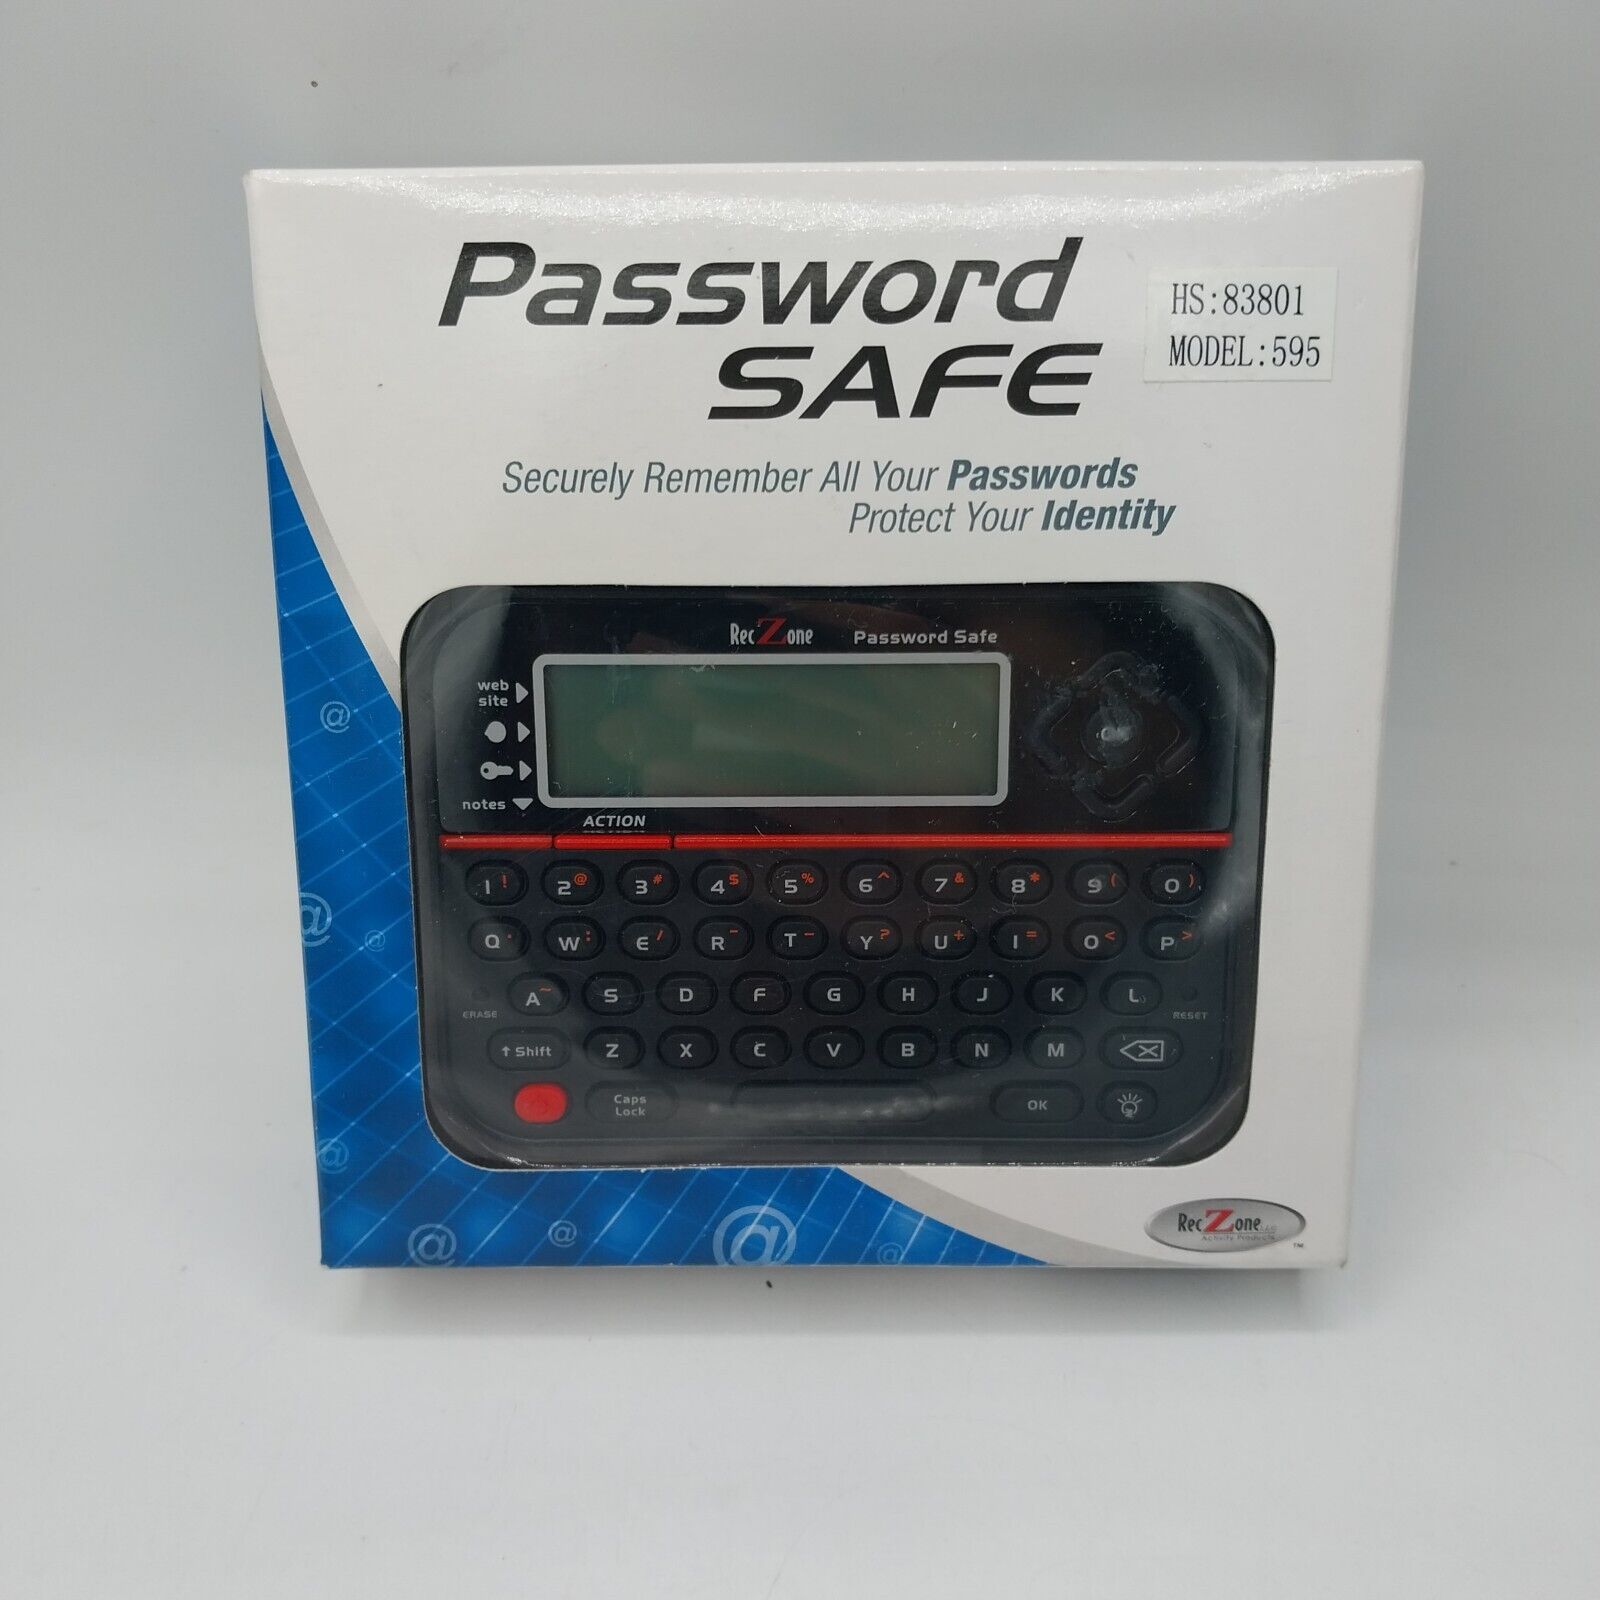 New Password Safe Model 595 Backlit LCD Built-In Memory Storage RecZone